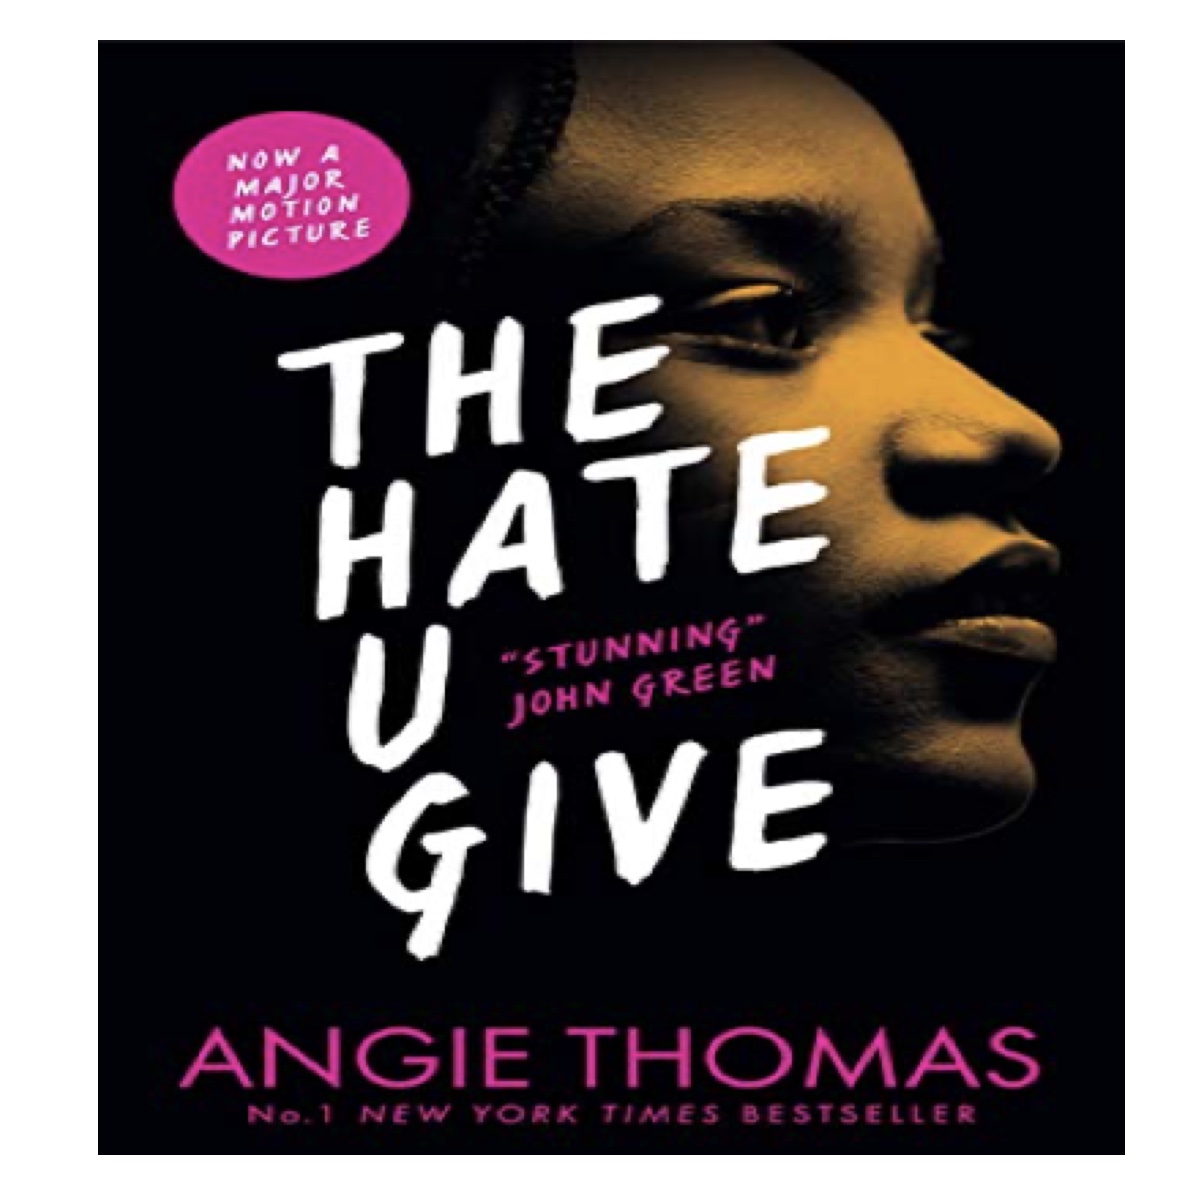 YWCA NH Racial Justice Fall Reading List  top pick #2

The Hate U Give

https://t.co/6VguiJlD0a

#racialjustice #ywcanh #onamission https://t.co/kjOesKClnS